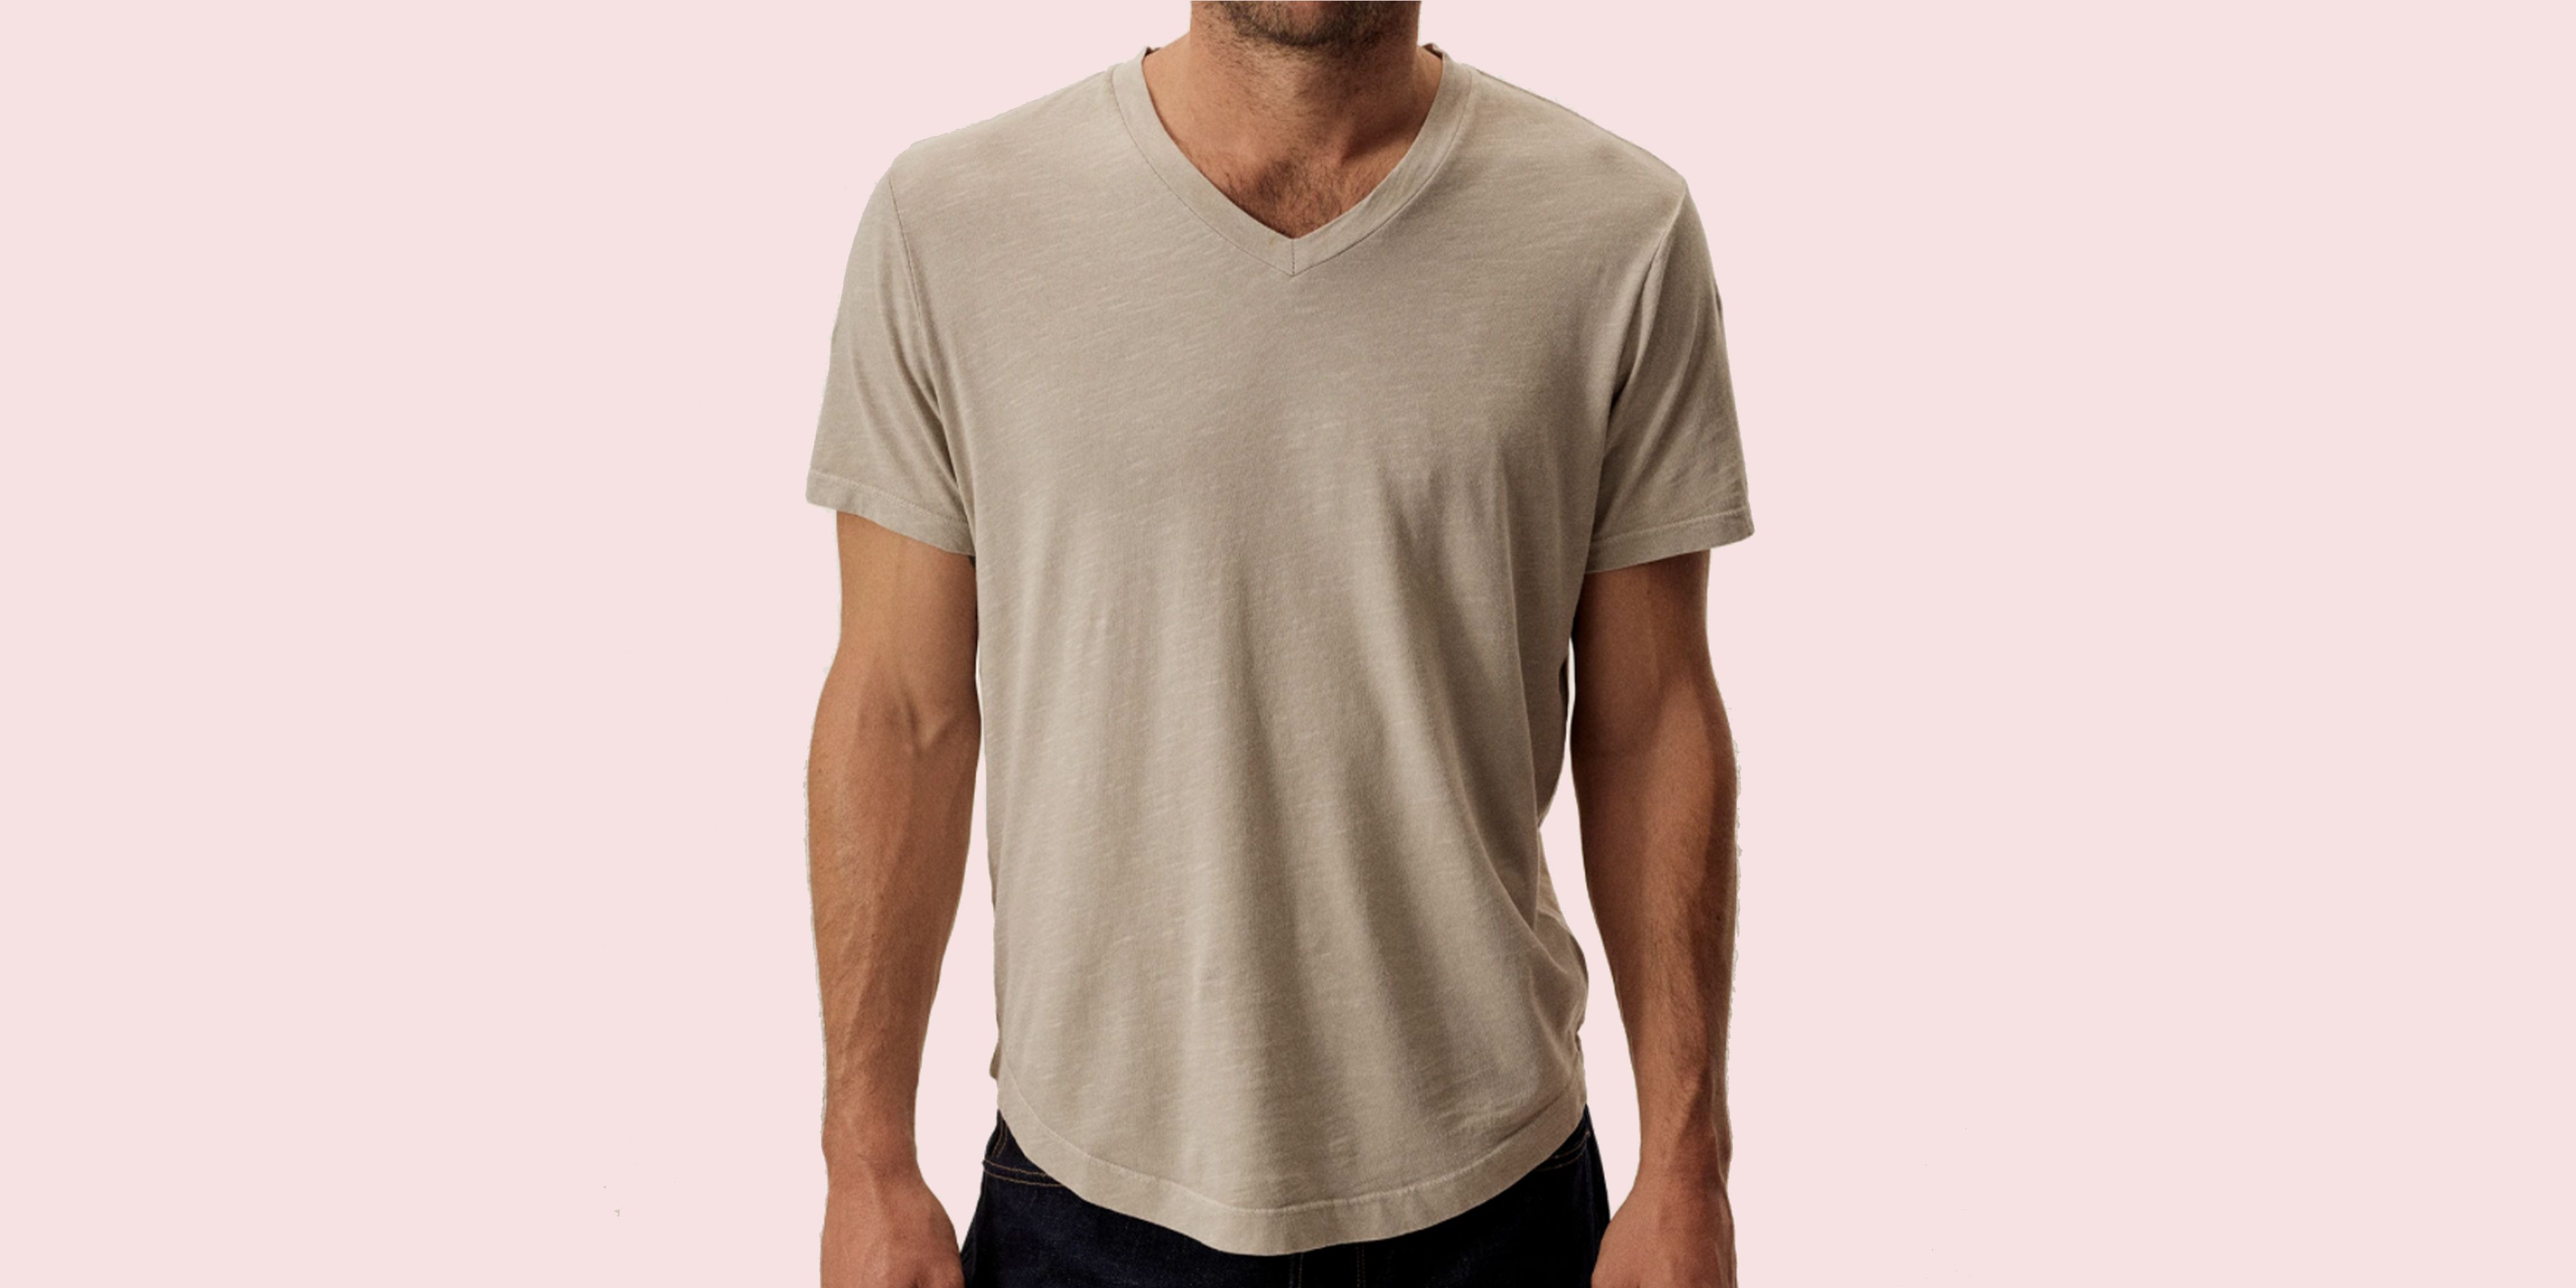 The 35 Best V-Neck T-Shirts to Wear on Their Own (or Under a Button-Up)